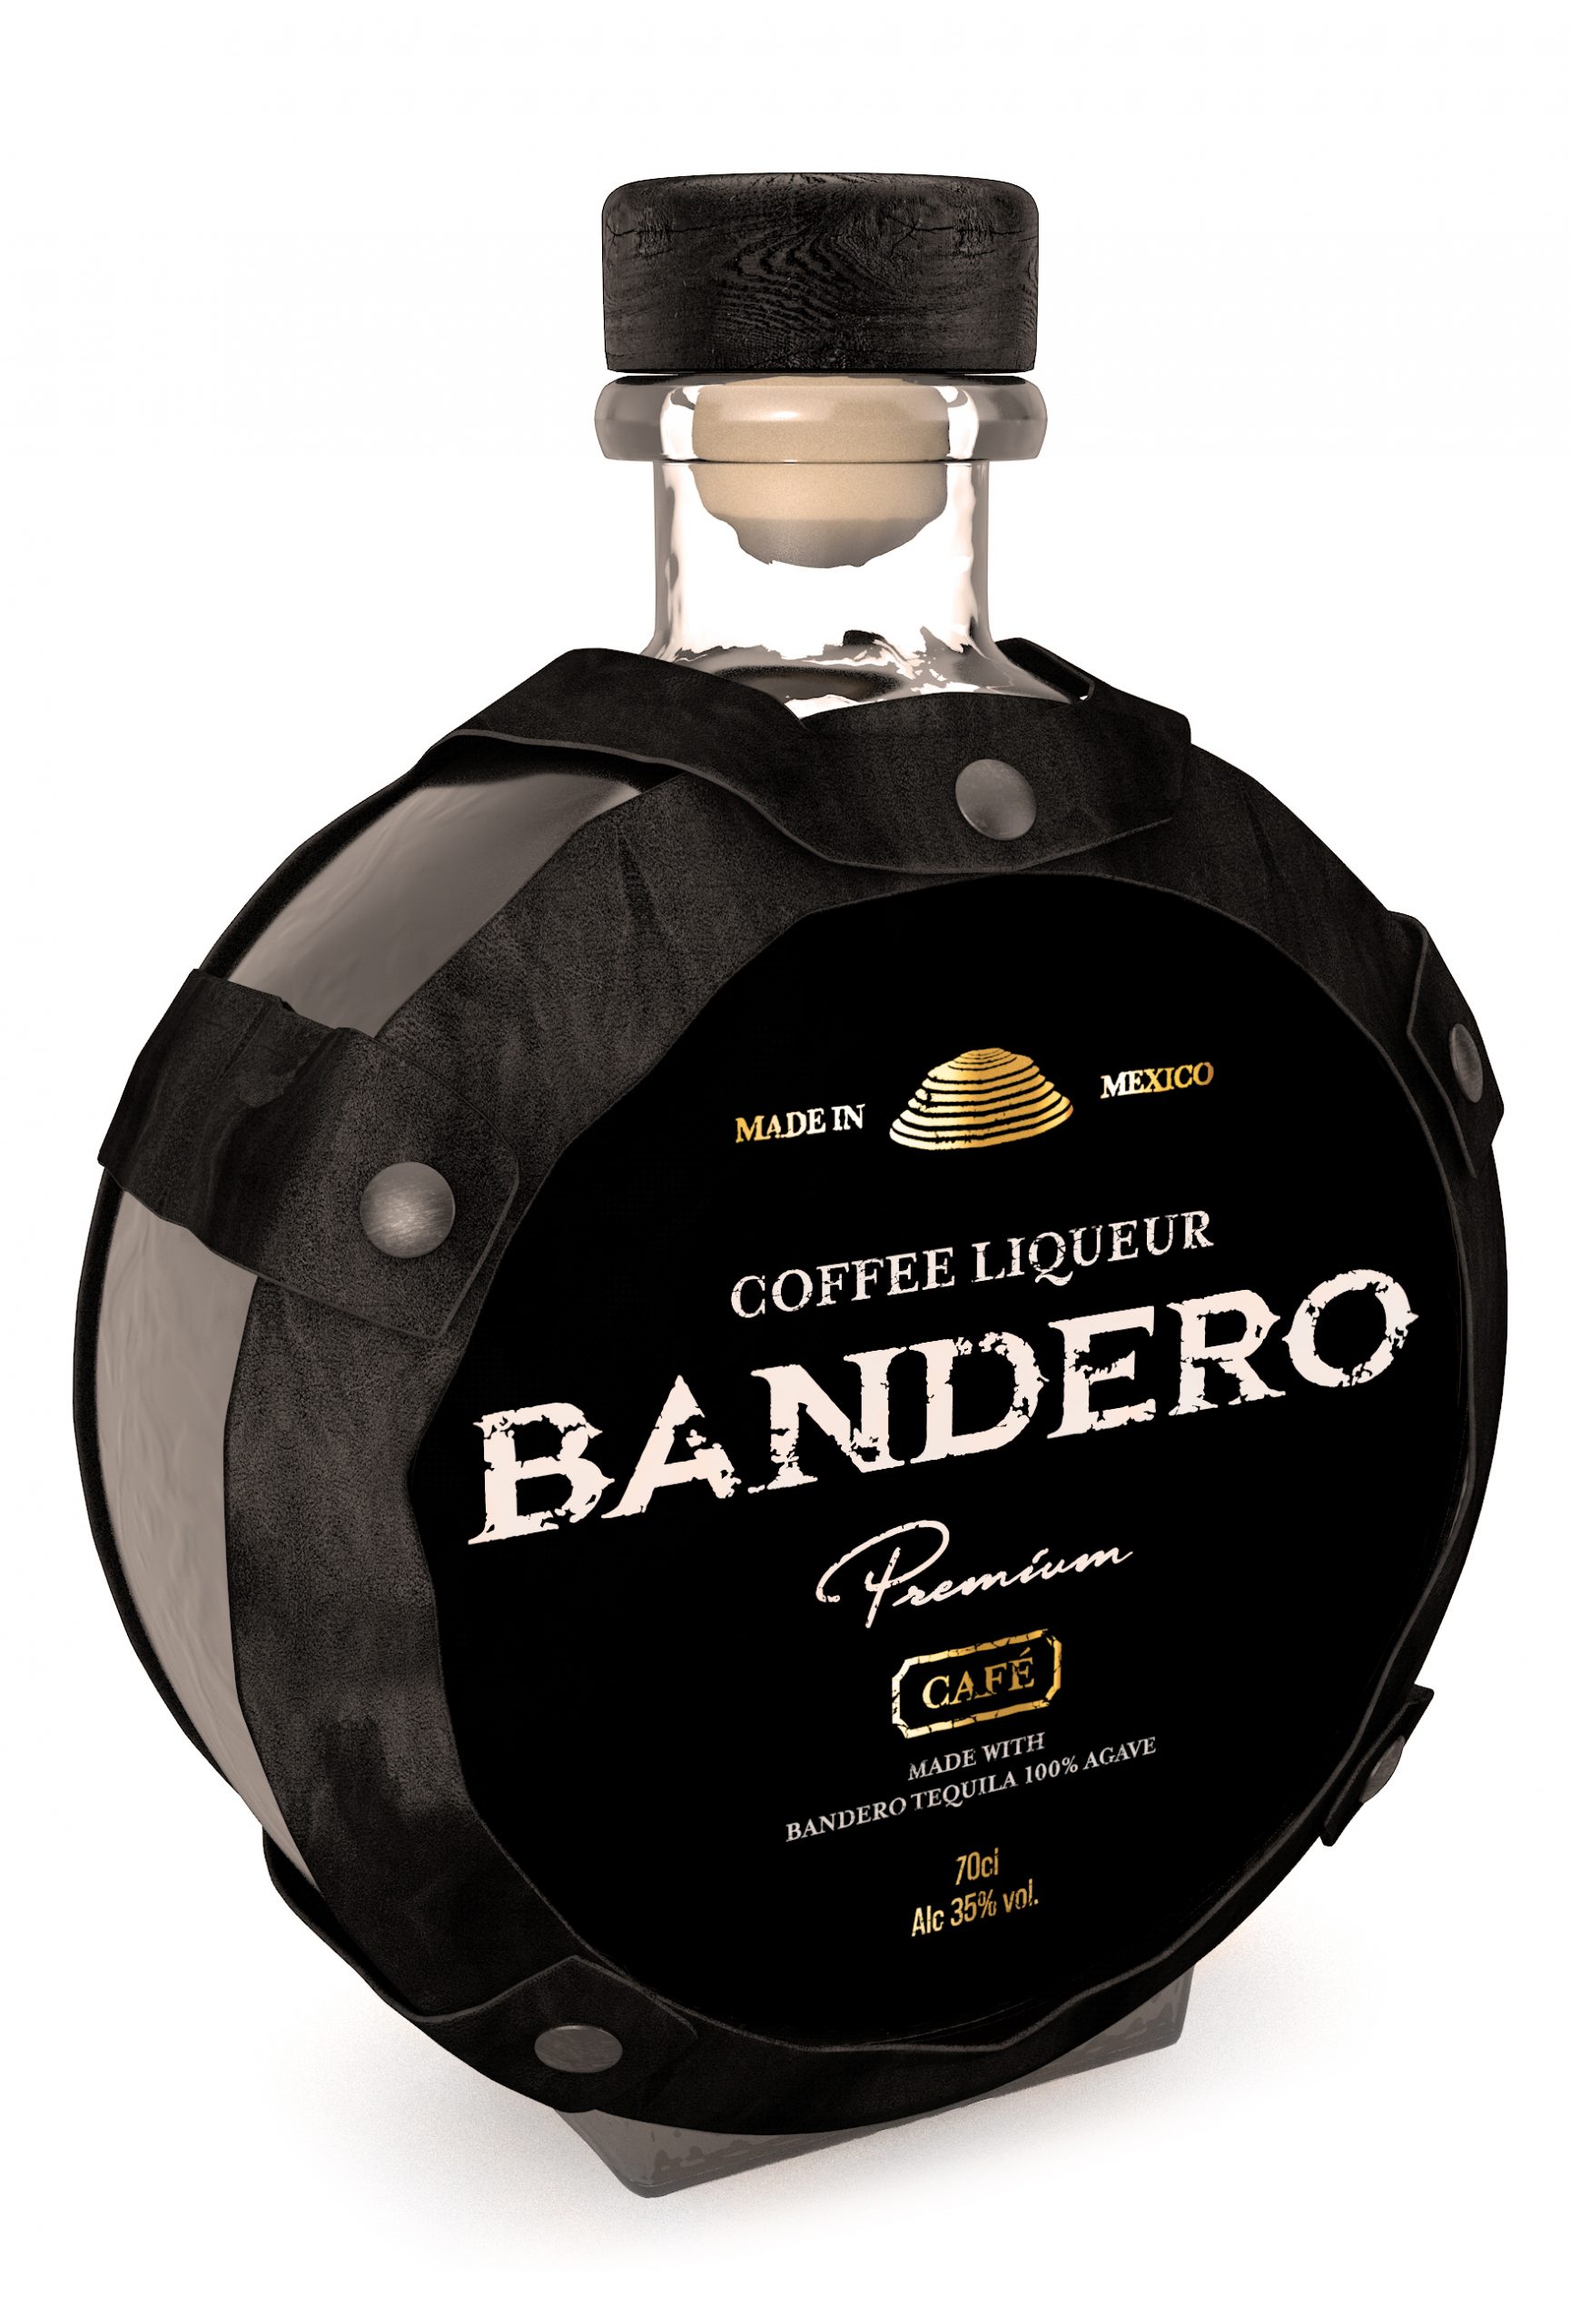 Bandero Café small batch coffee-infused premium Tequila launches